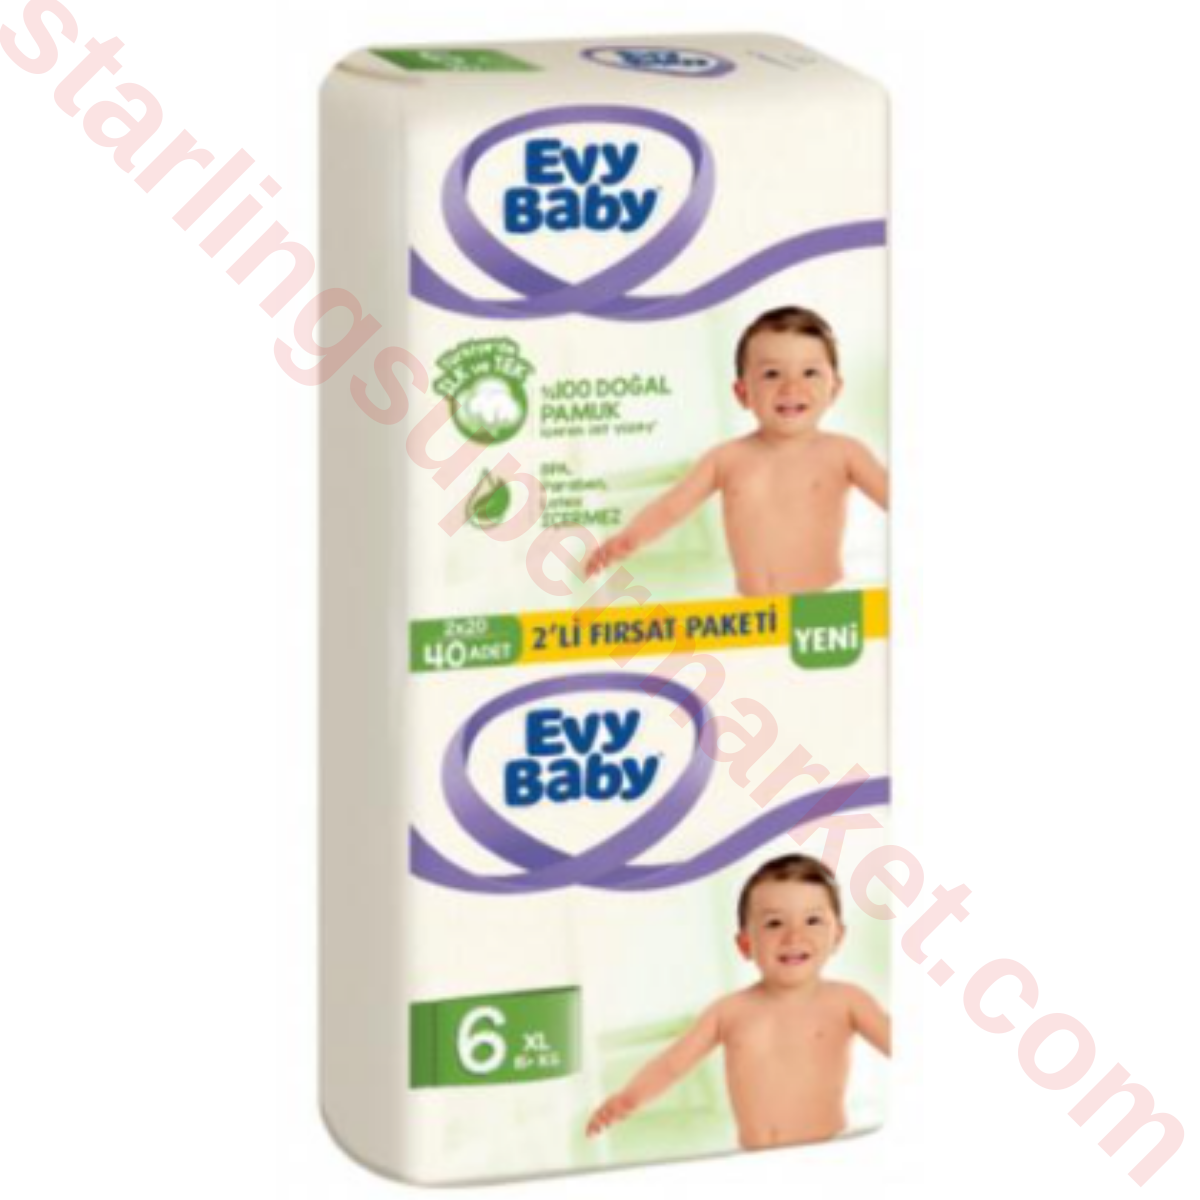 EVY BABY BABY DIAPER XLARGE NO:6 ECO PACK OF 2